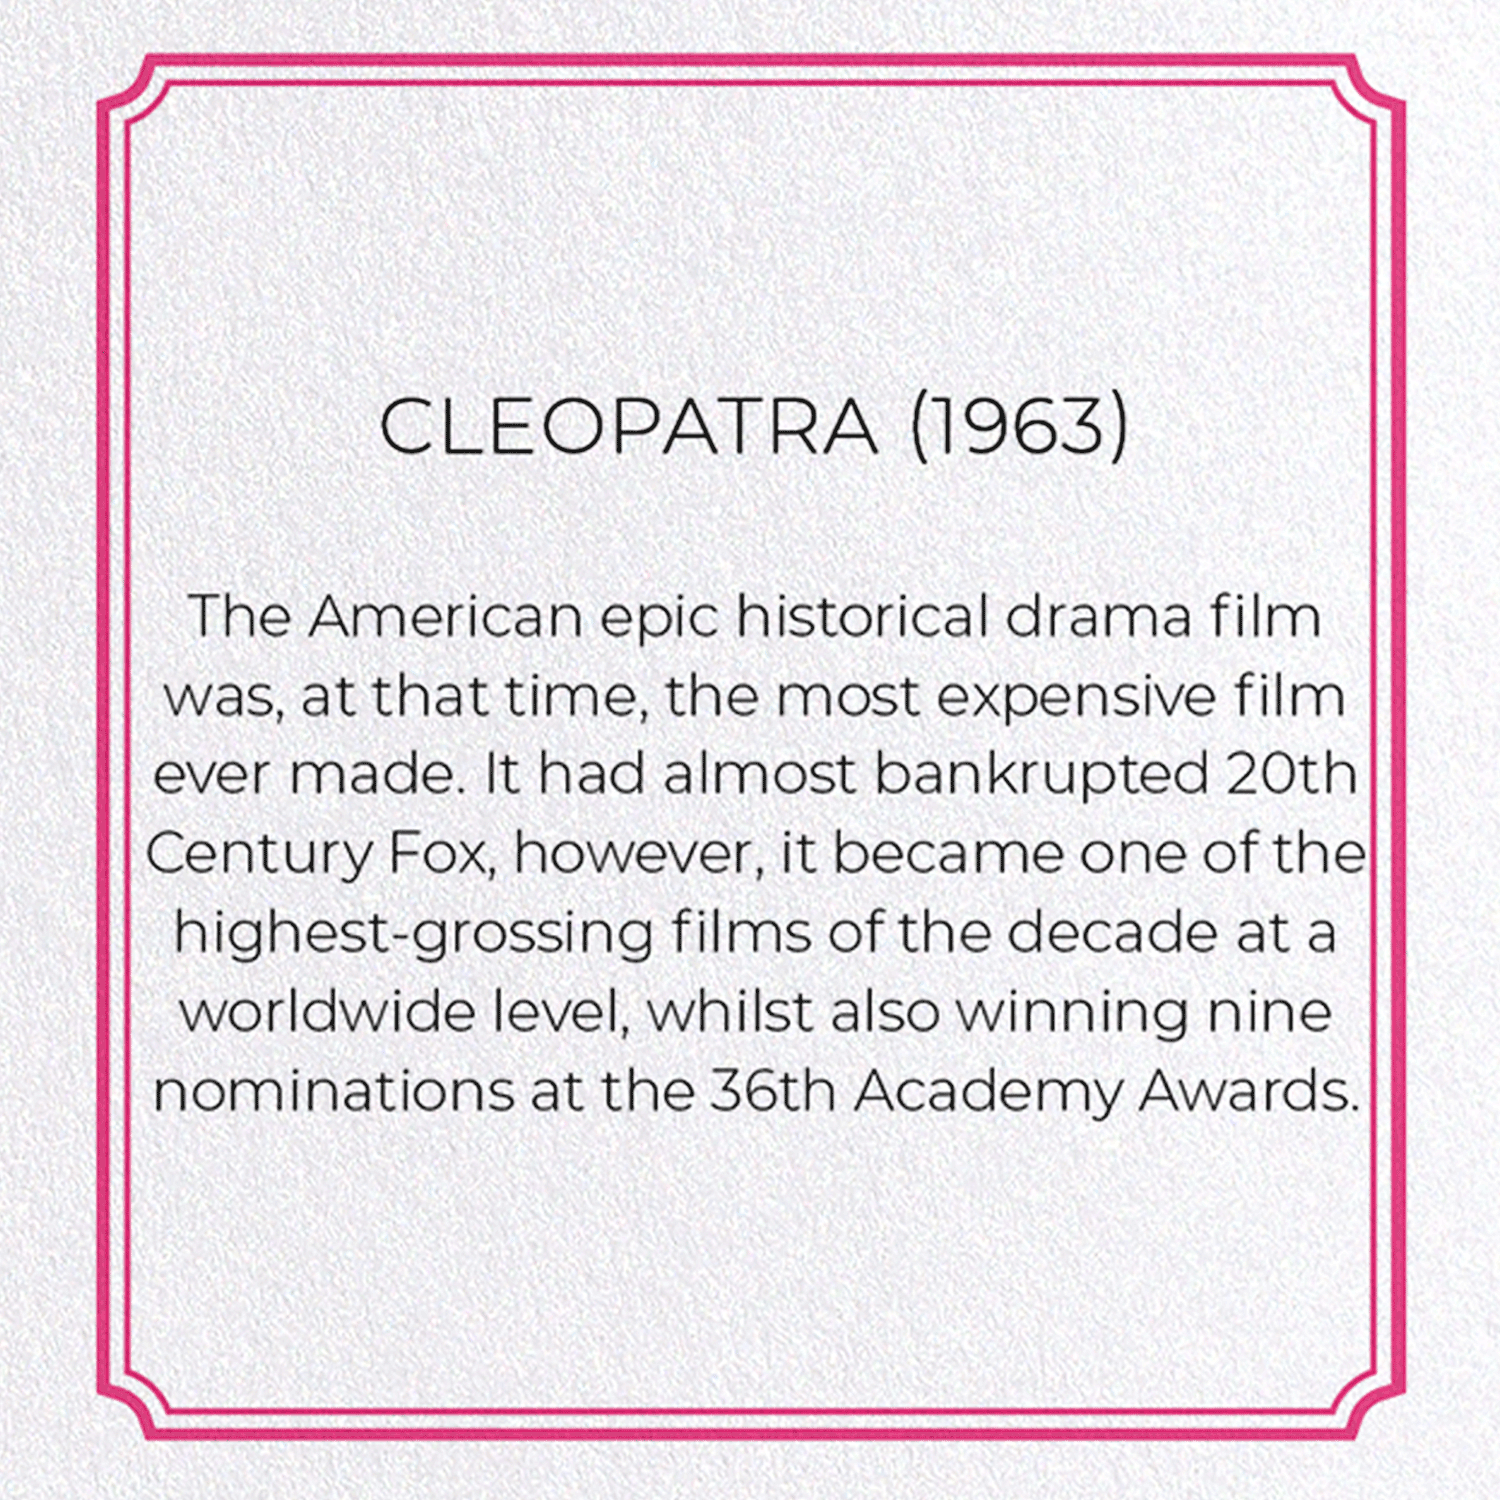 CLEOPATRA (1963): Poster Greeting Card